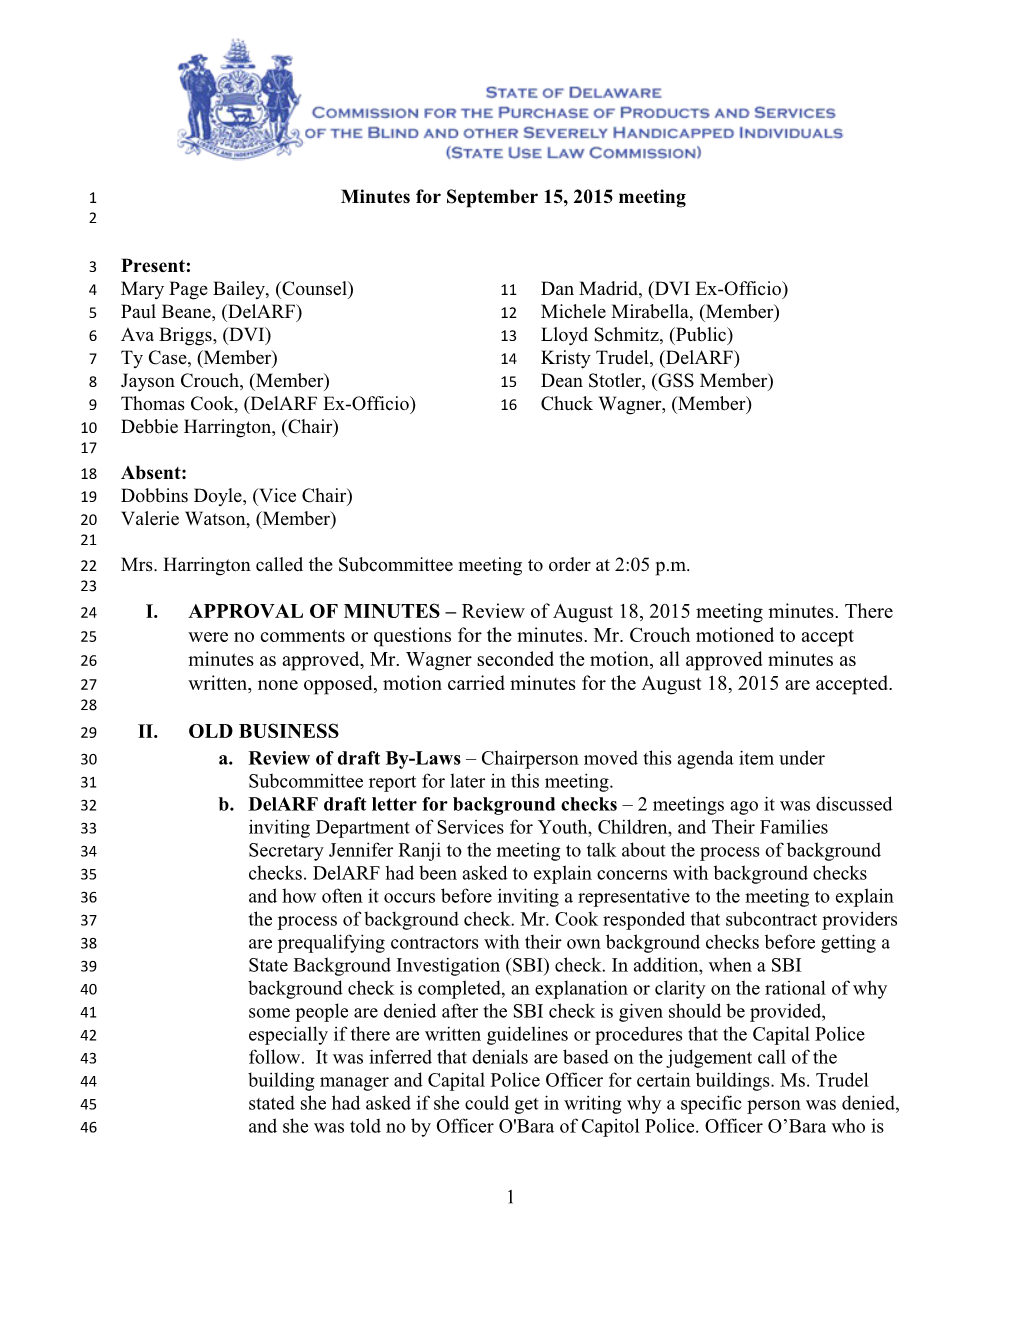 Minutes for September 15, 2015 Meeting